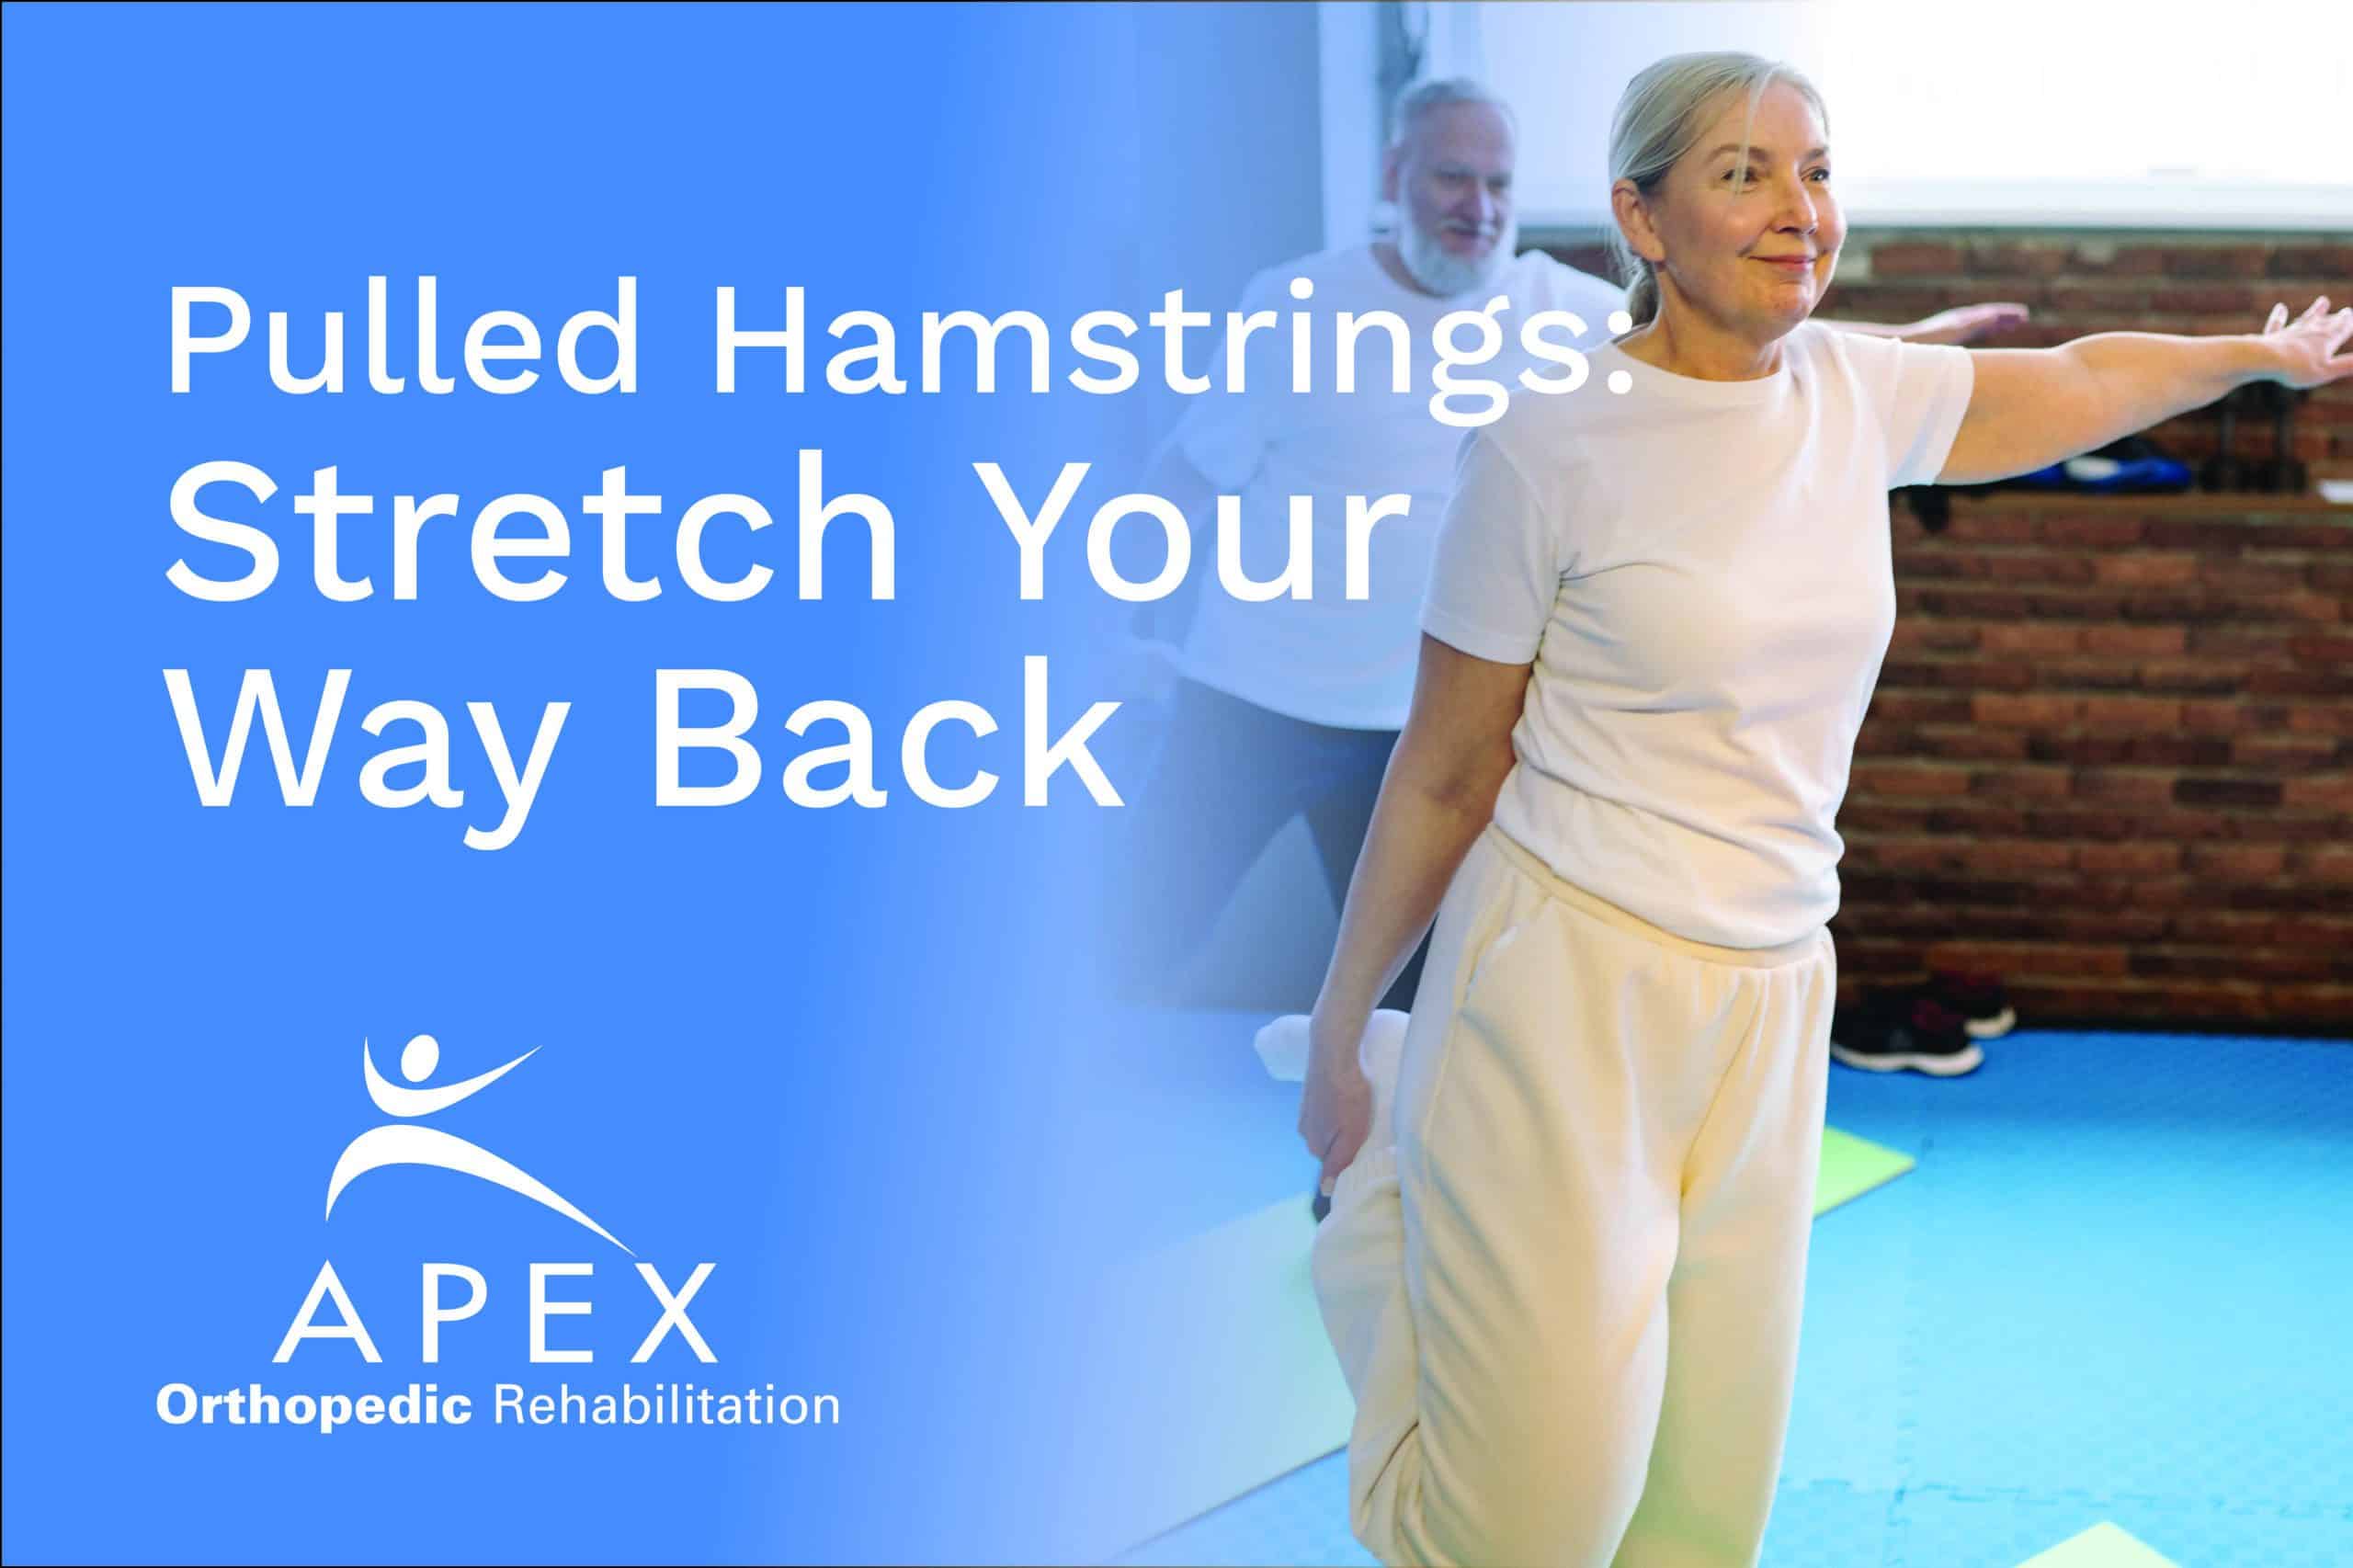 Pulled Hamstrings: Stretch Your Way Back